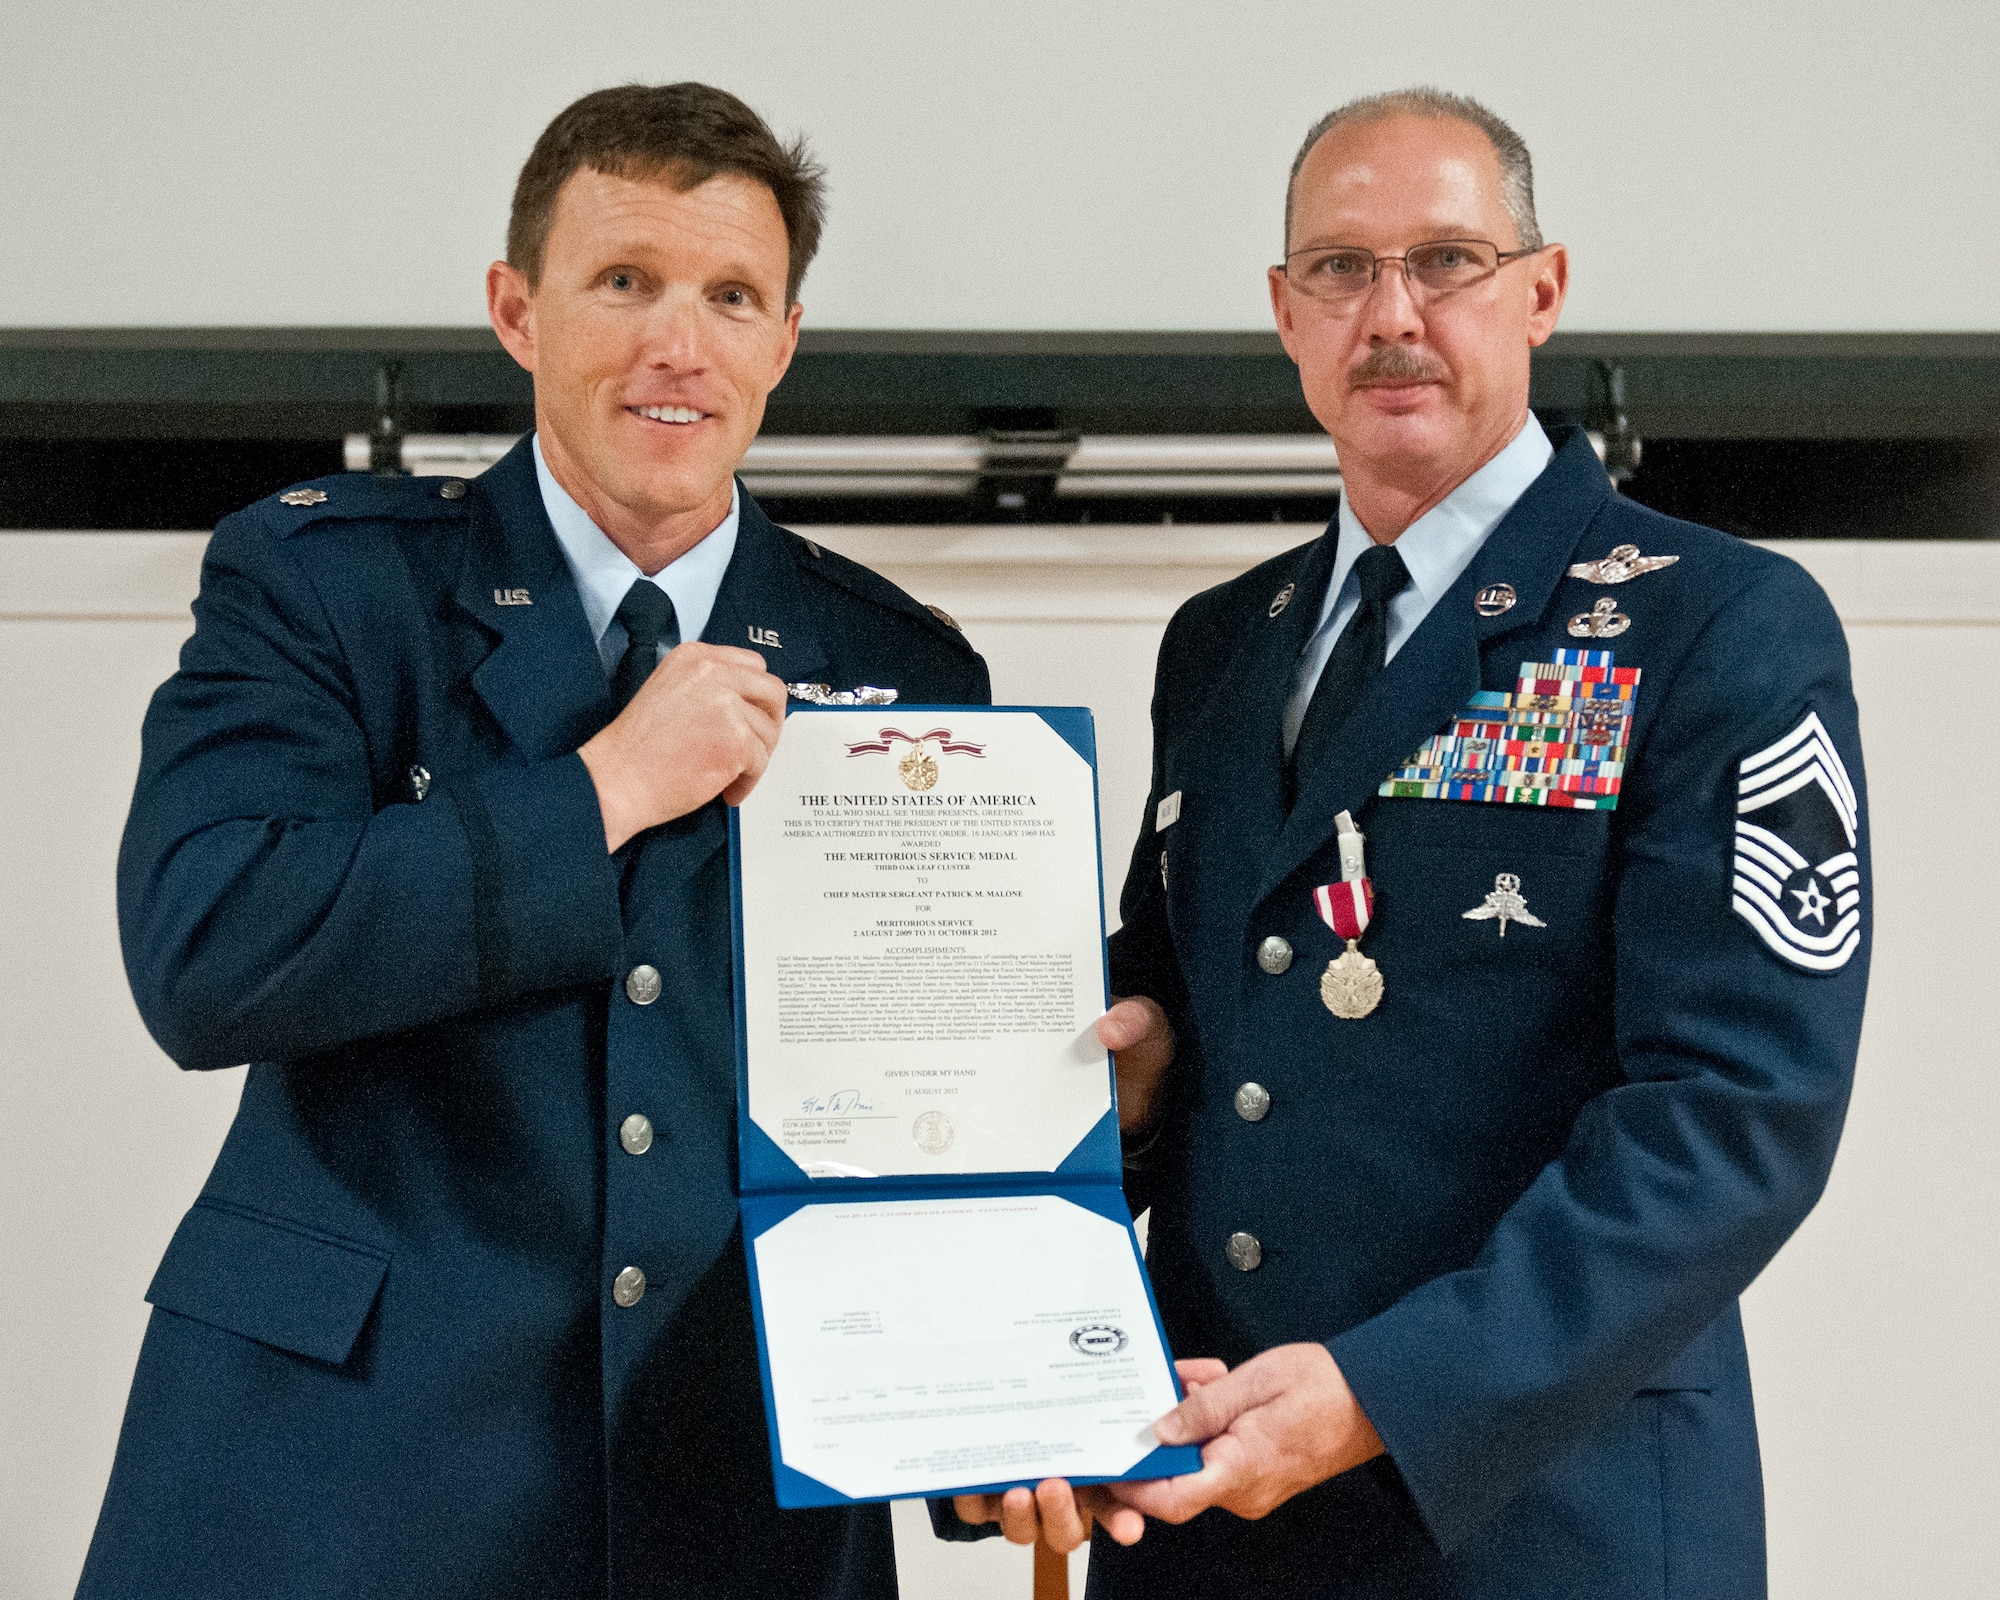 Lt. Col. Jeff Wilkinson, commander of the 123rd Special Tactics Squadron, presents Chief Master Sgt. Patrick Malone with a Meritorious Service Medal during Malone's retirement ceremony Oct. 20, 2012, at the Kentucky Air National Guard Base in Louisville, Ky. Malone served in the active-duty Air Force and Air National Guard for 30 years. (U.S. Air Force photo by Senior Airman Maxwell Rechel)